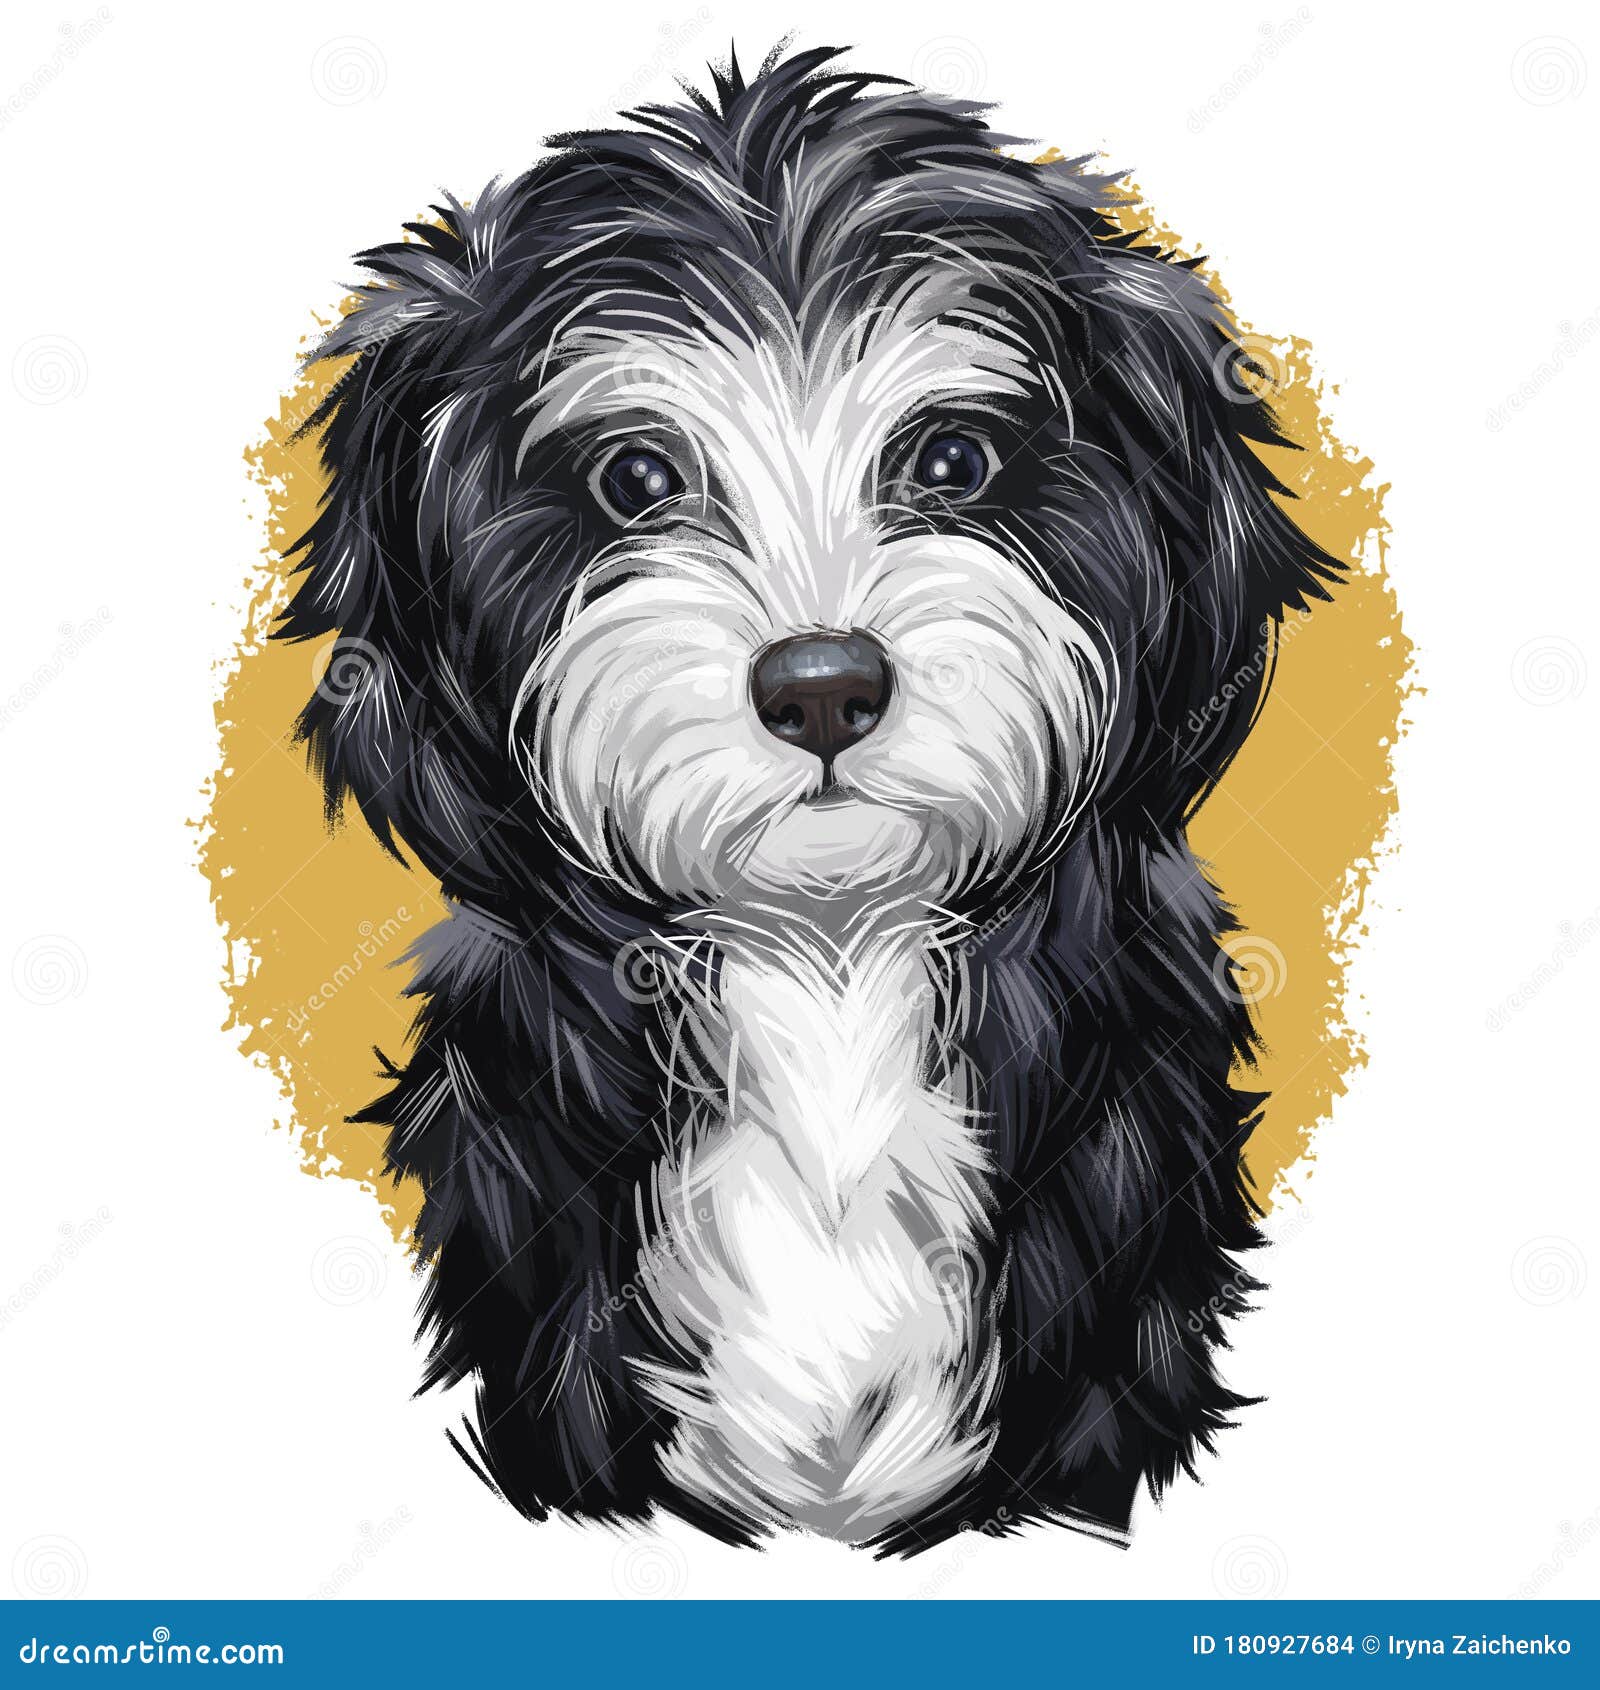 Cavoodle Or Crossbreed Dog Offspring Of Poodle And Cavalier King Charles Spaniel Red Toy Cavoodle Puppy Hand Drawn Stock Illustration Illustration Of Friend Cavalier 180927684